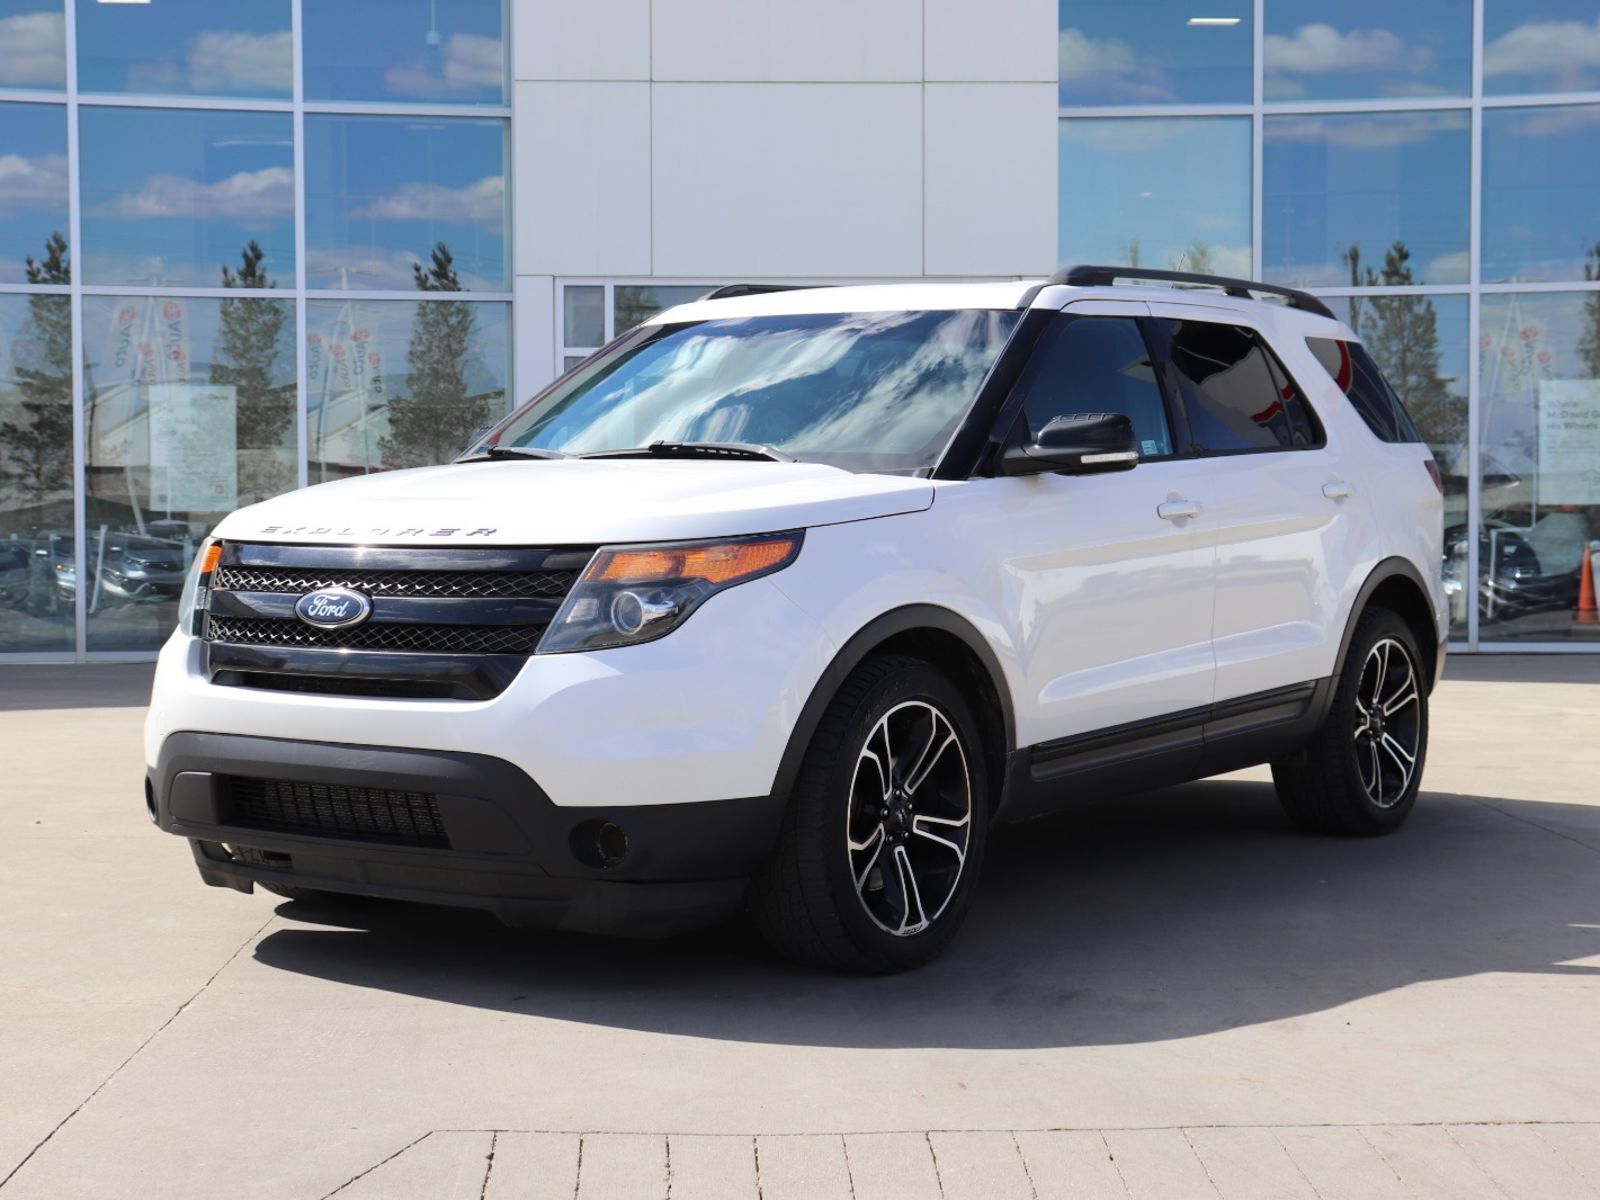 2015 Ford Explorer SPORT 4WD ONE OWNER NO ACCIDENTS!